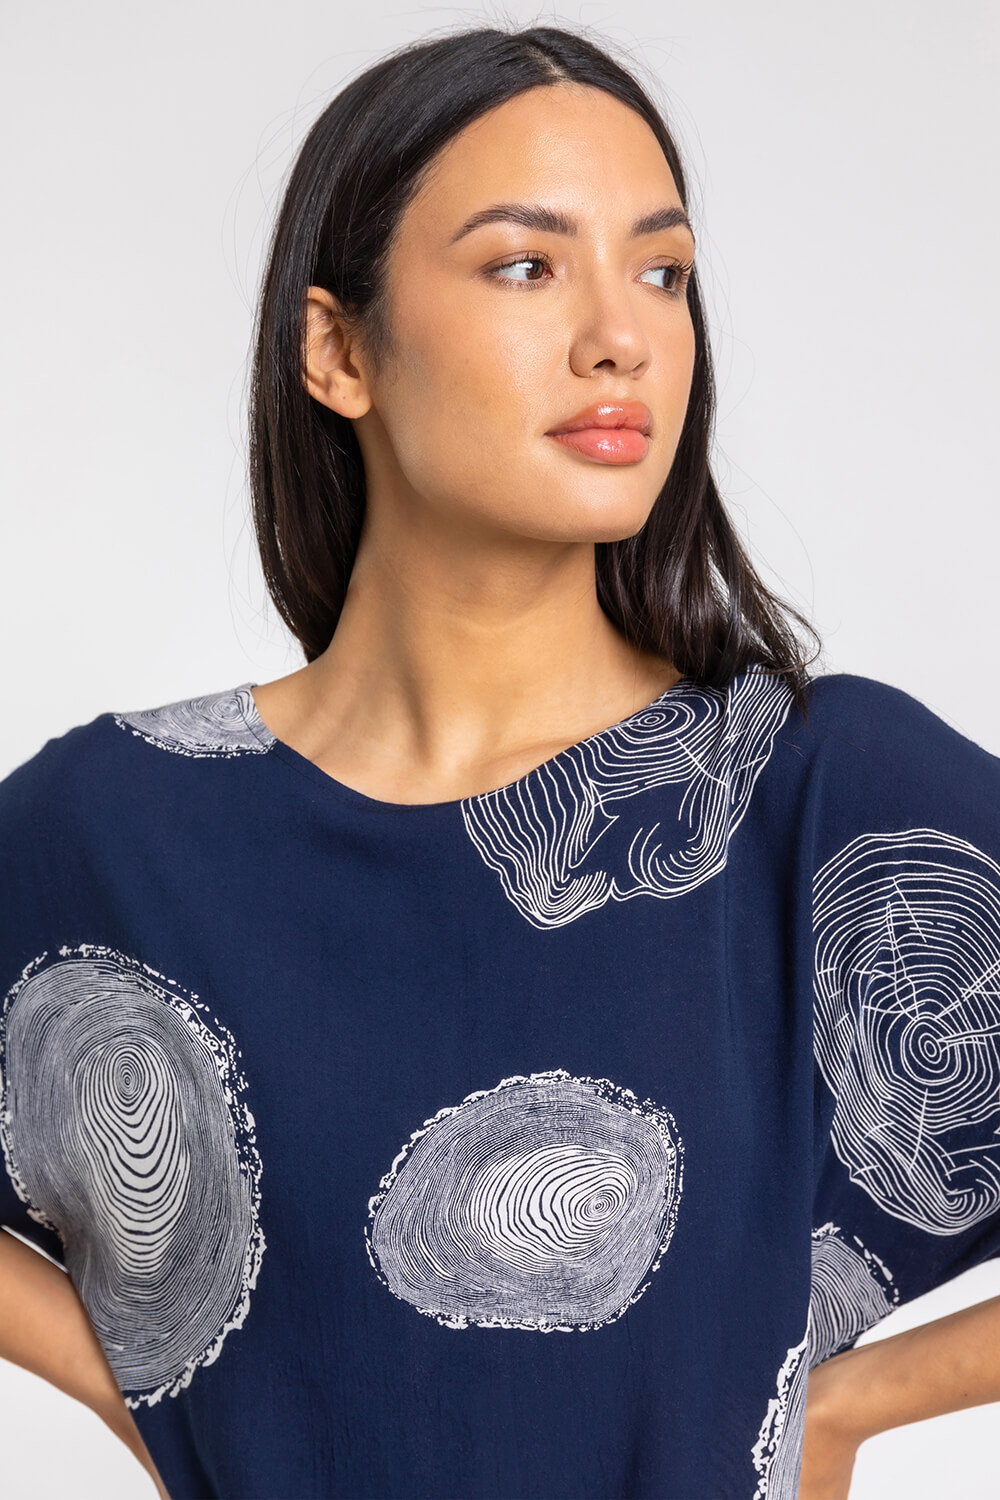 Linear Abstract Print Tunic Top in Navy - Roman Originals UK